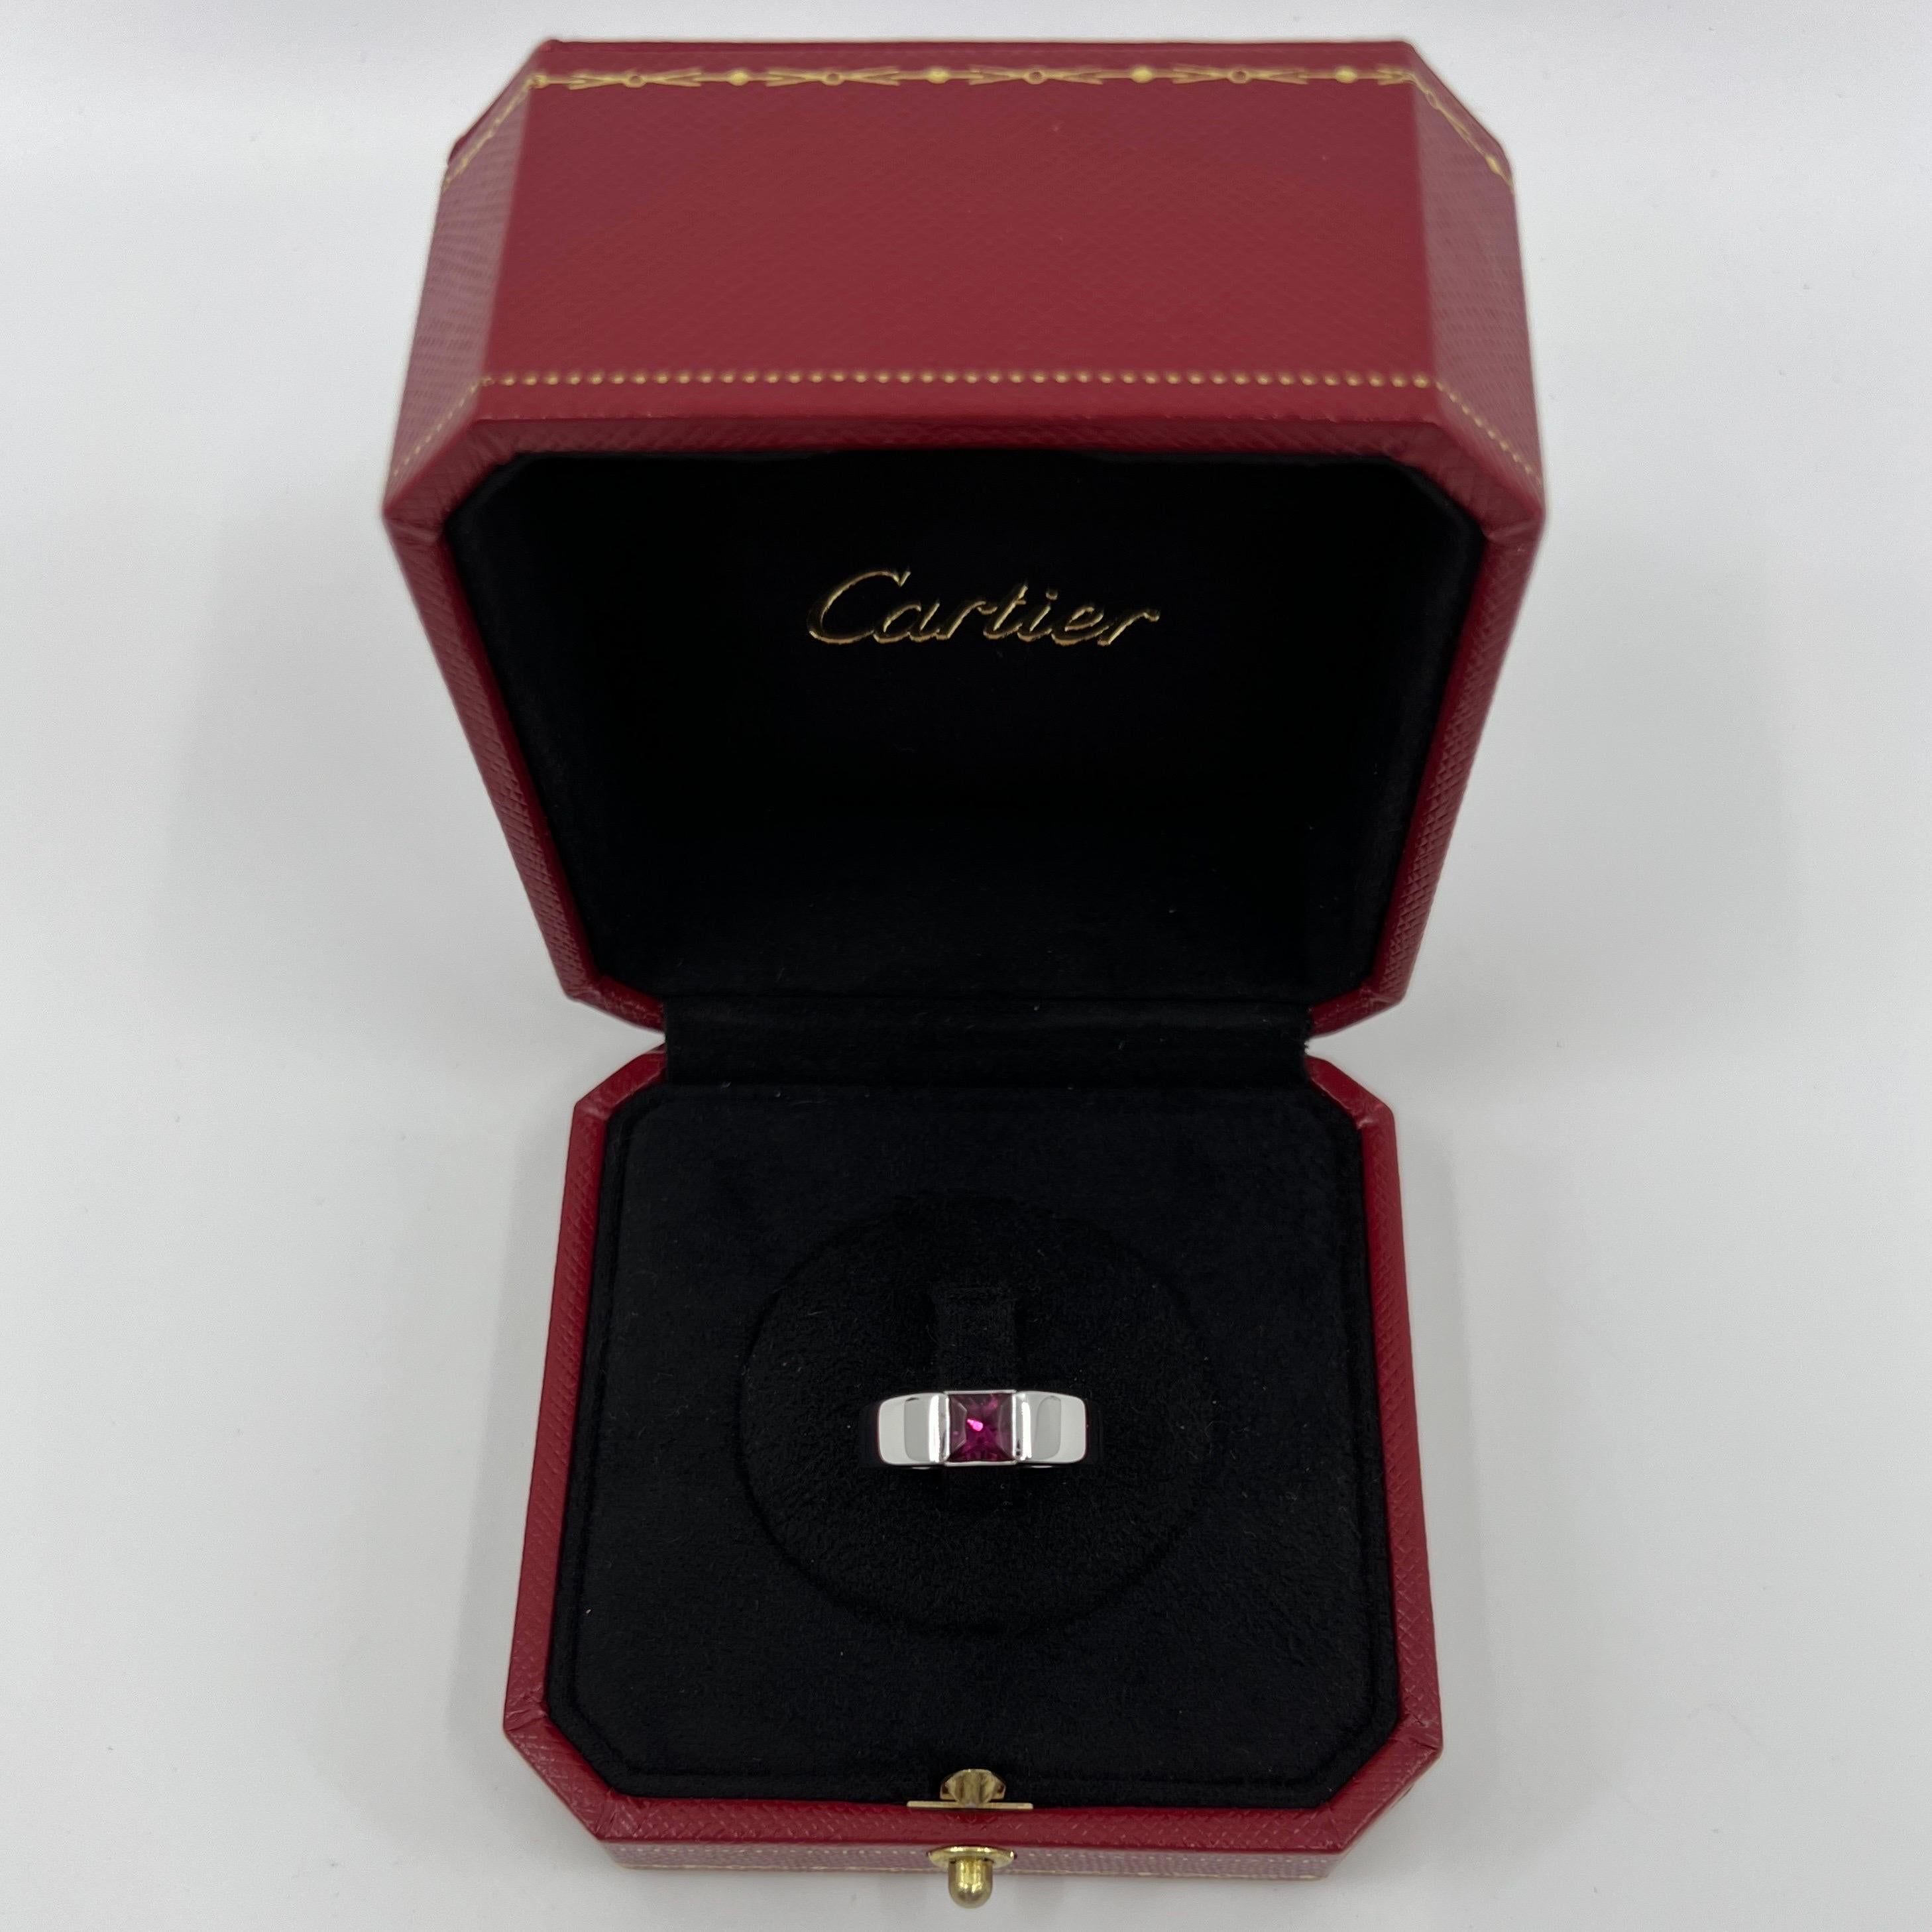 Rare Vintage Cartier Pink Purple Rhodolite Garnet 18 Karat White Gold Tank Ring.

Stunning white gold ring with a 5mm tension set bright pink fancy-cut rhodolite garnet. Fine jewellery houses like Cartier only use the finest of gemstones and this